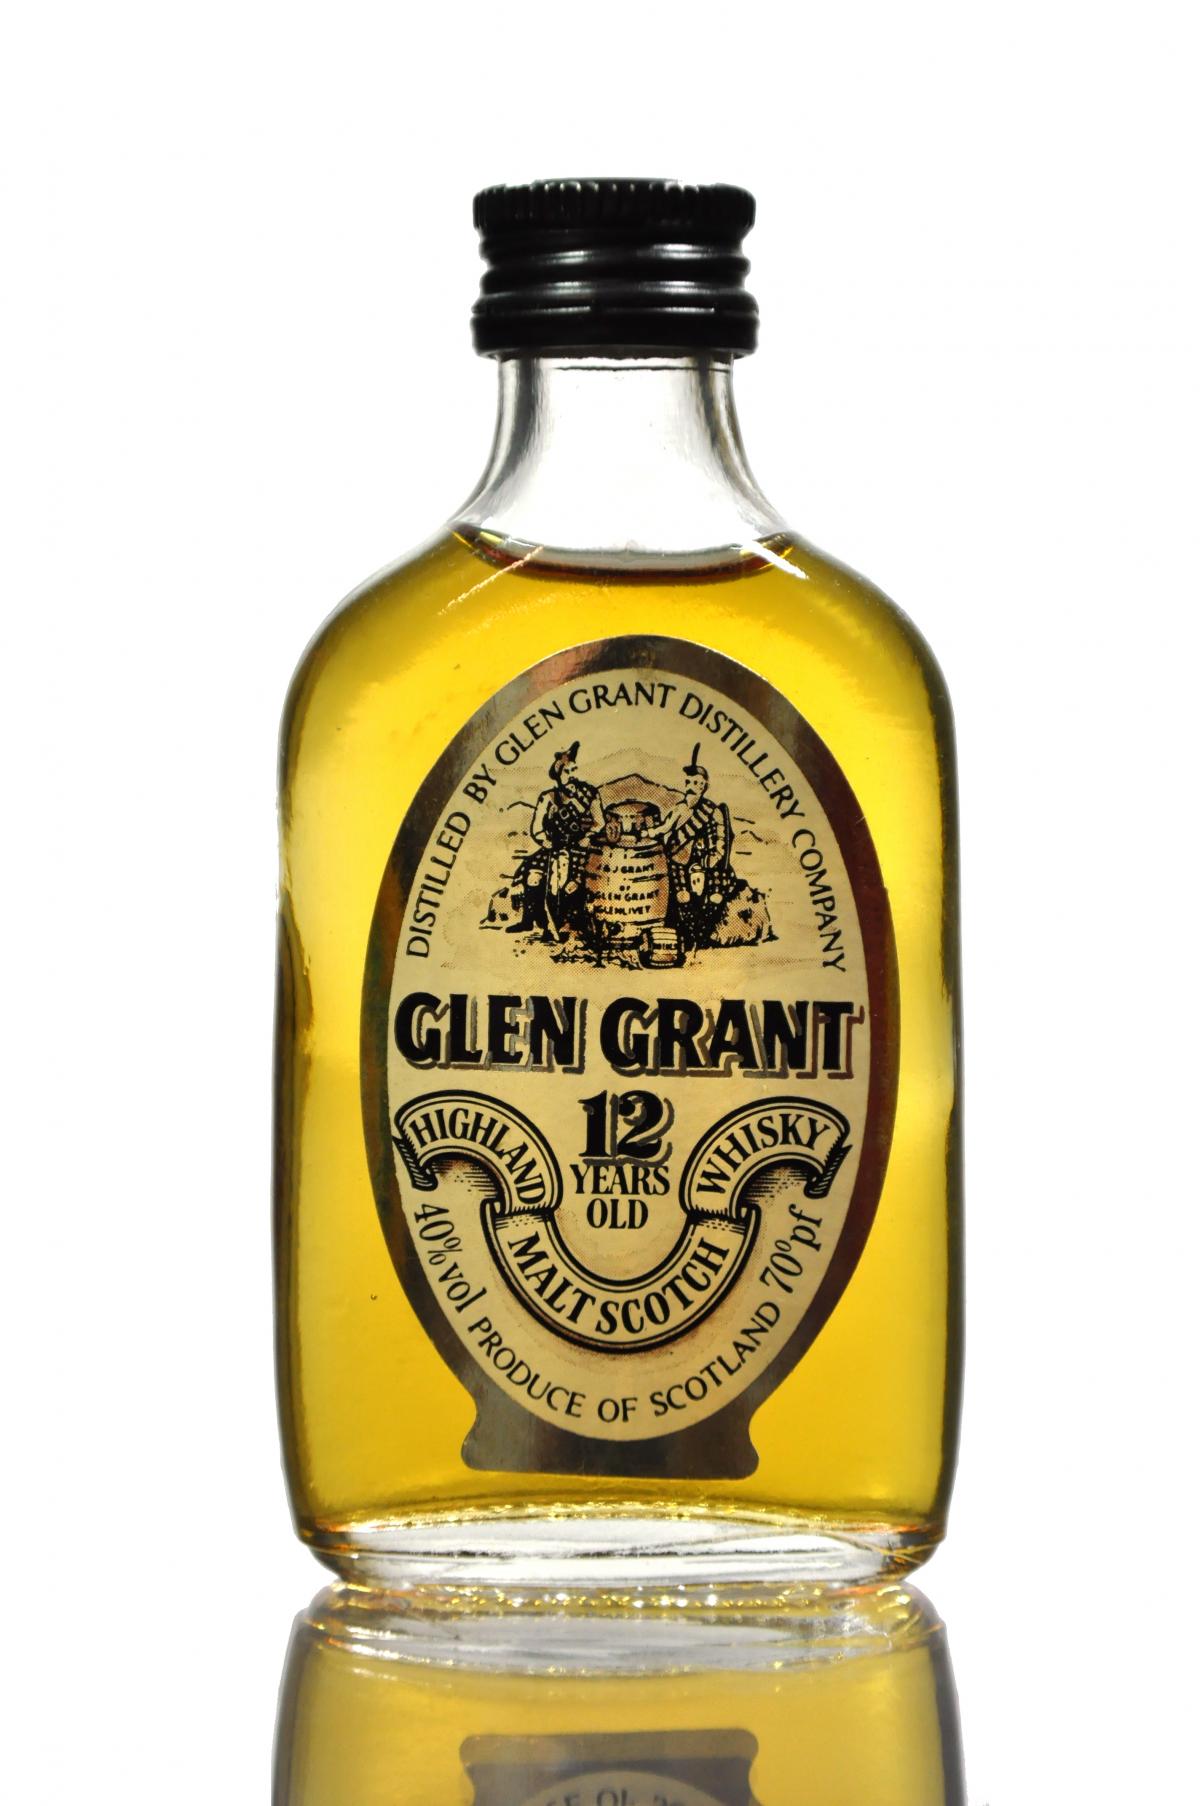 Glen Grant 12 Year Old 70 Proof Miniature